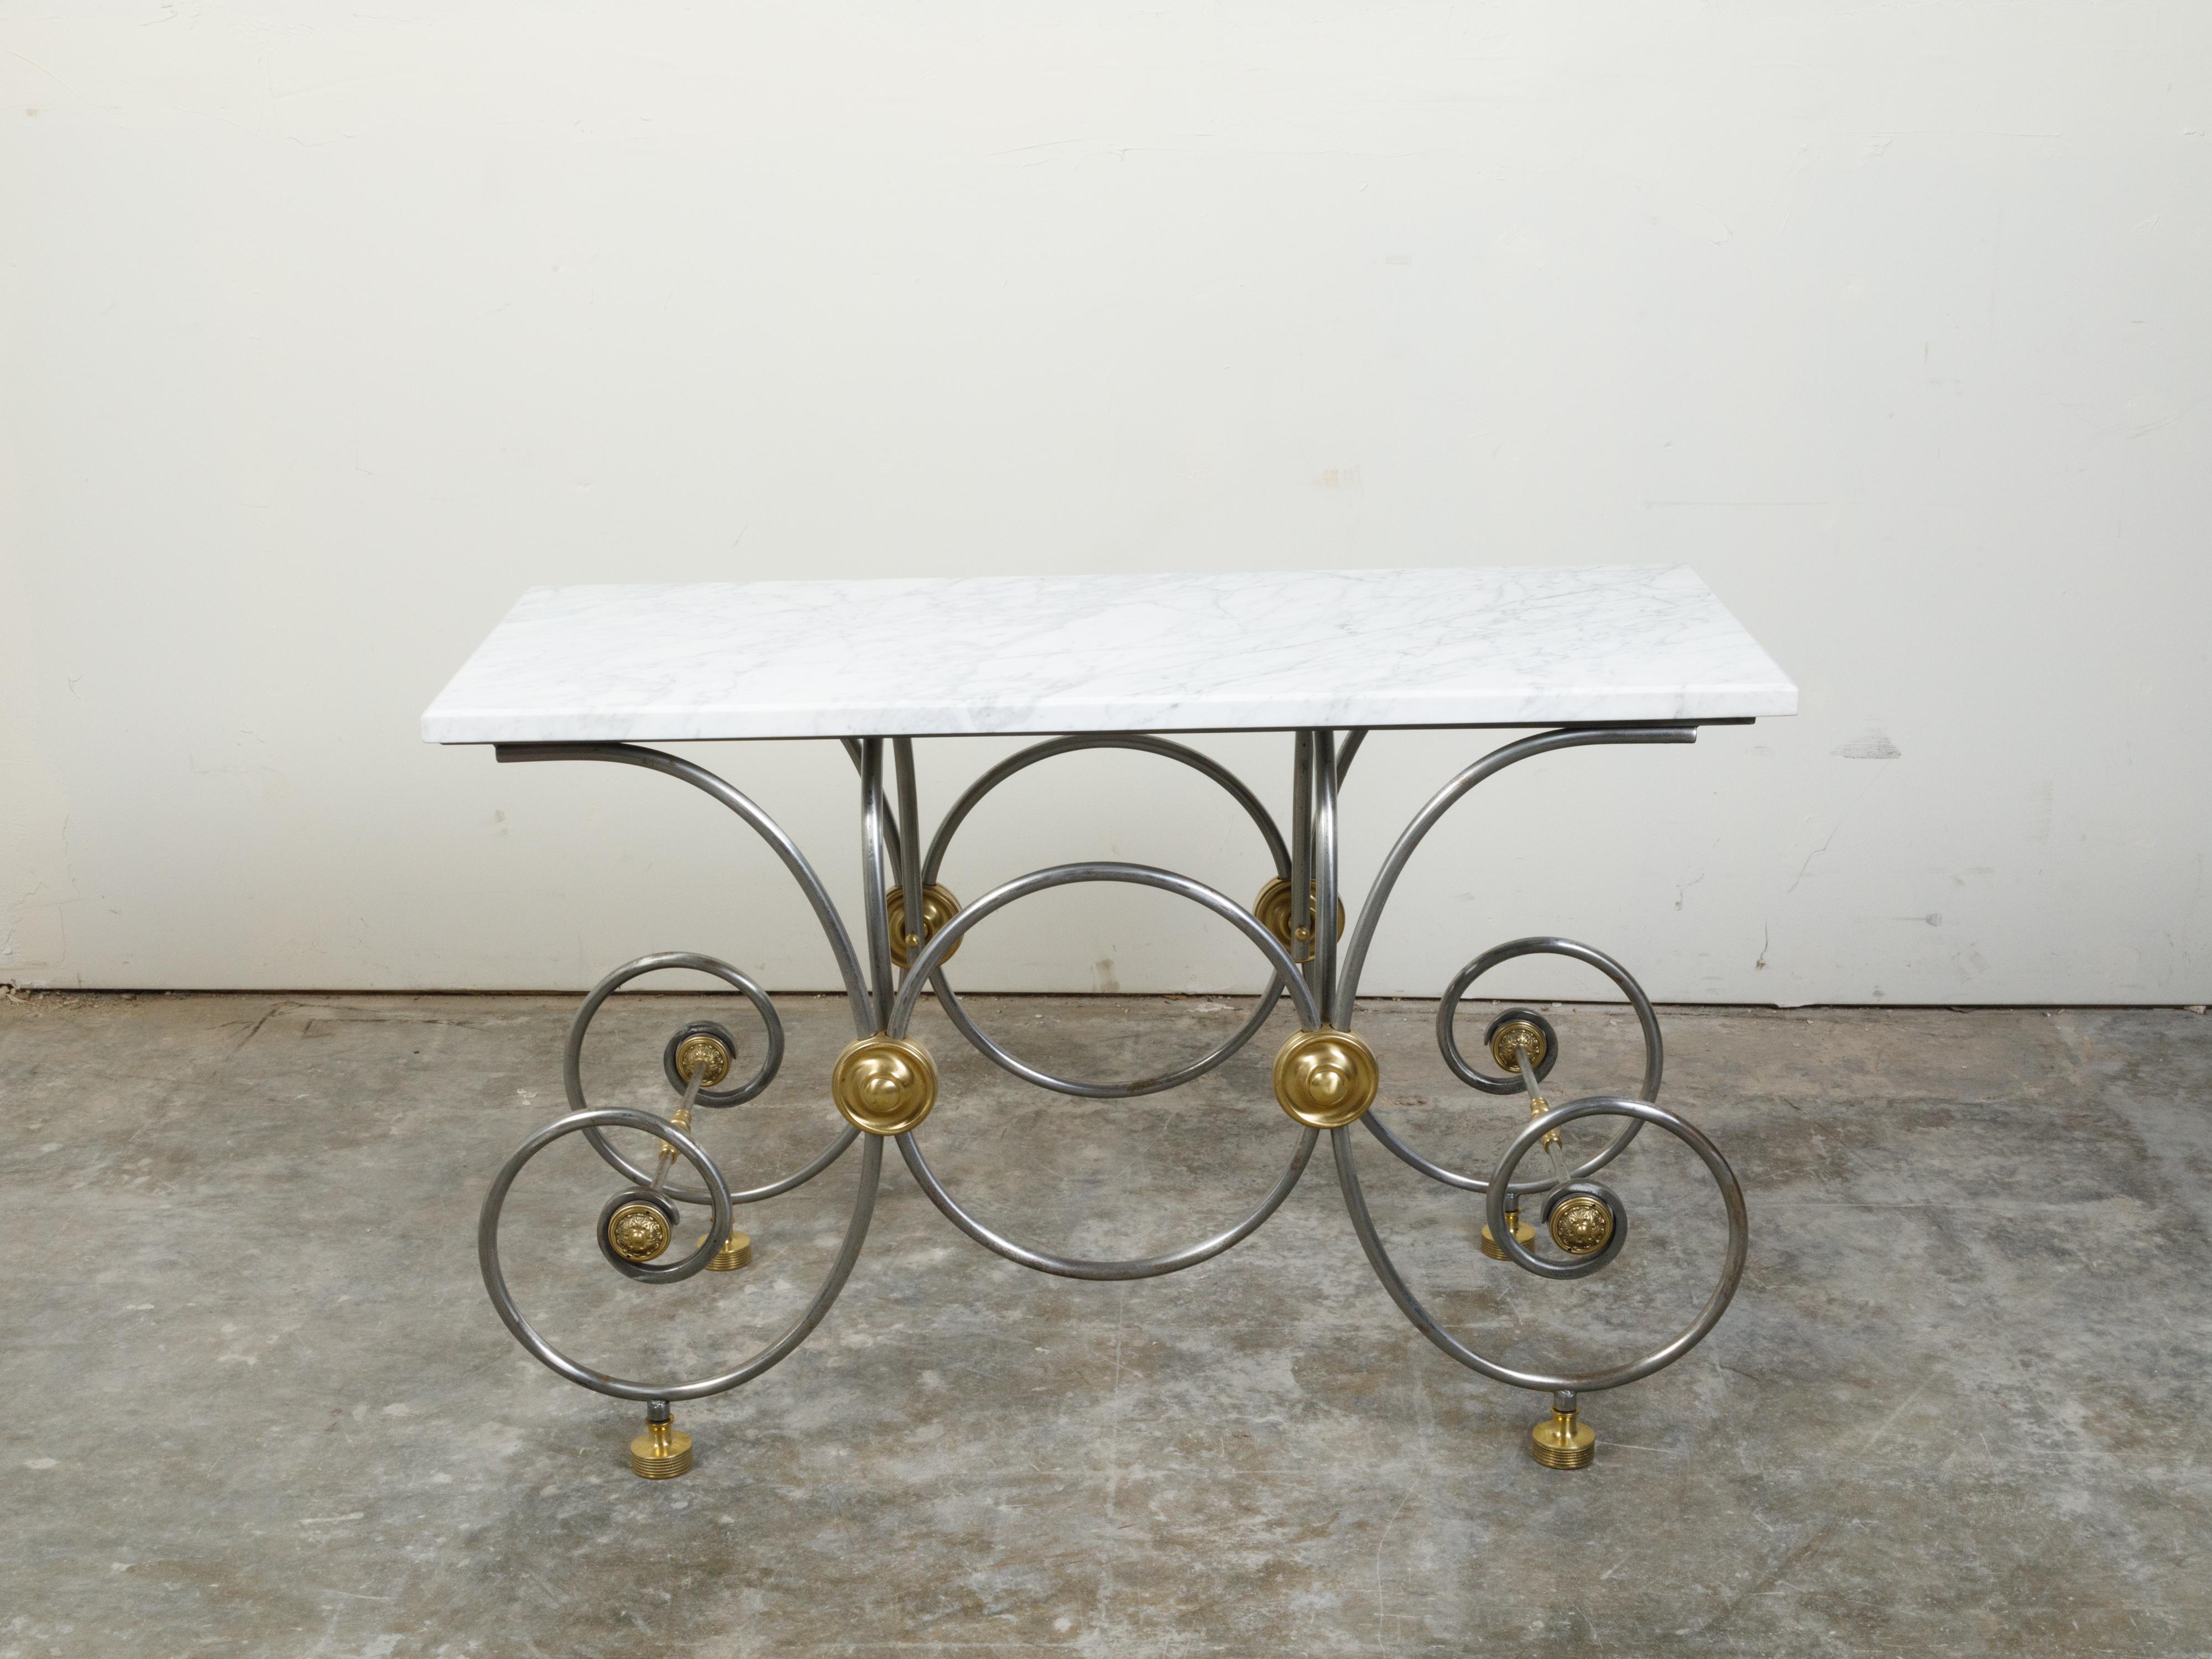 A French steel and brass baker's table from the late 19th century with white marble top and scrolling legs. Created in France during the last quarter of the 19th century, this baker's table features a rectangular white marble top sitting above a